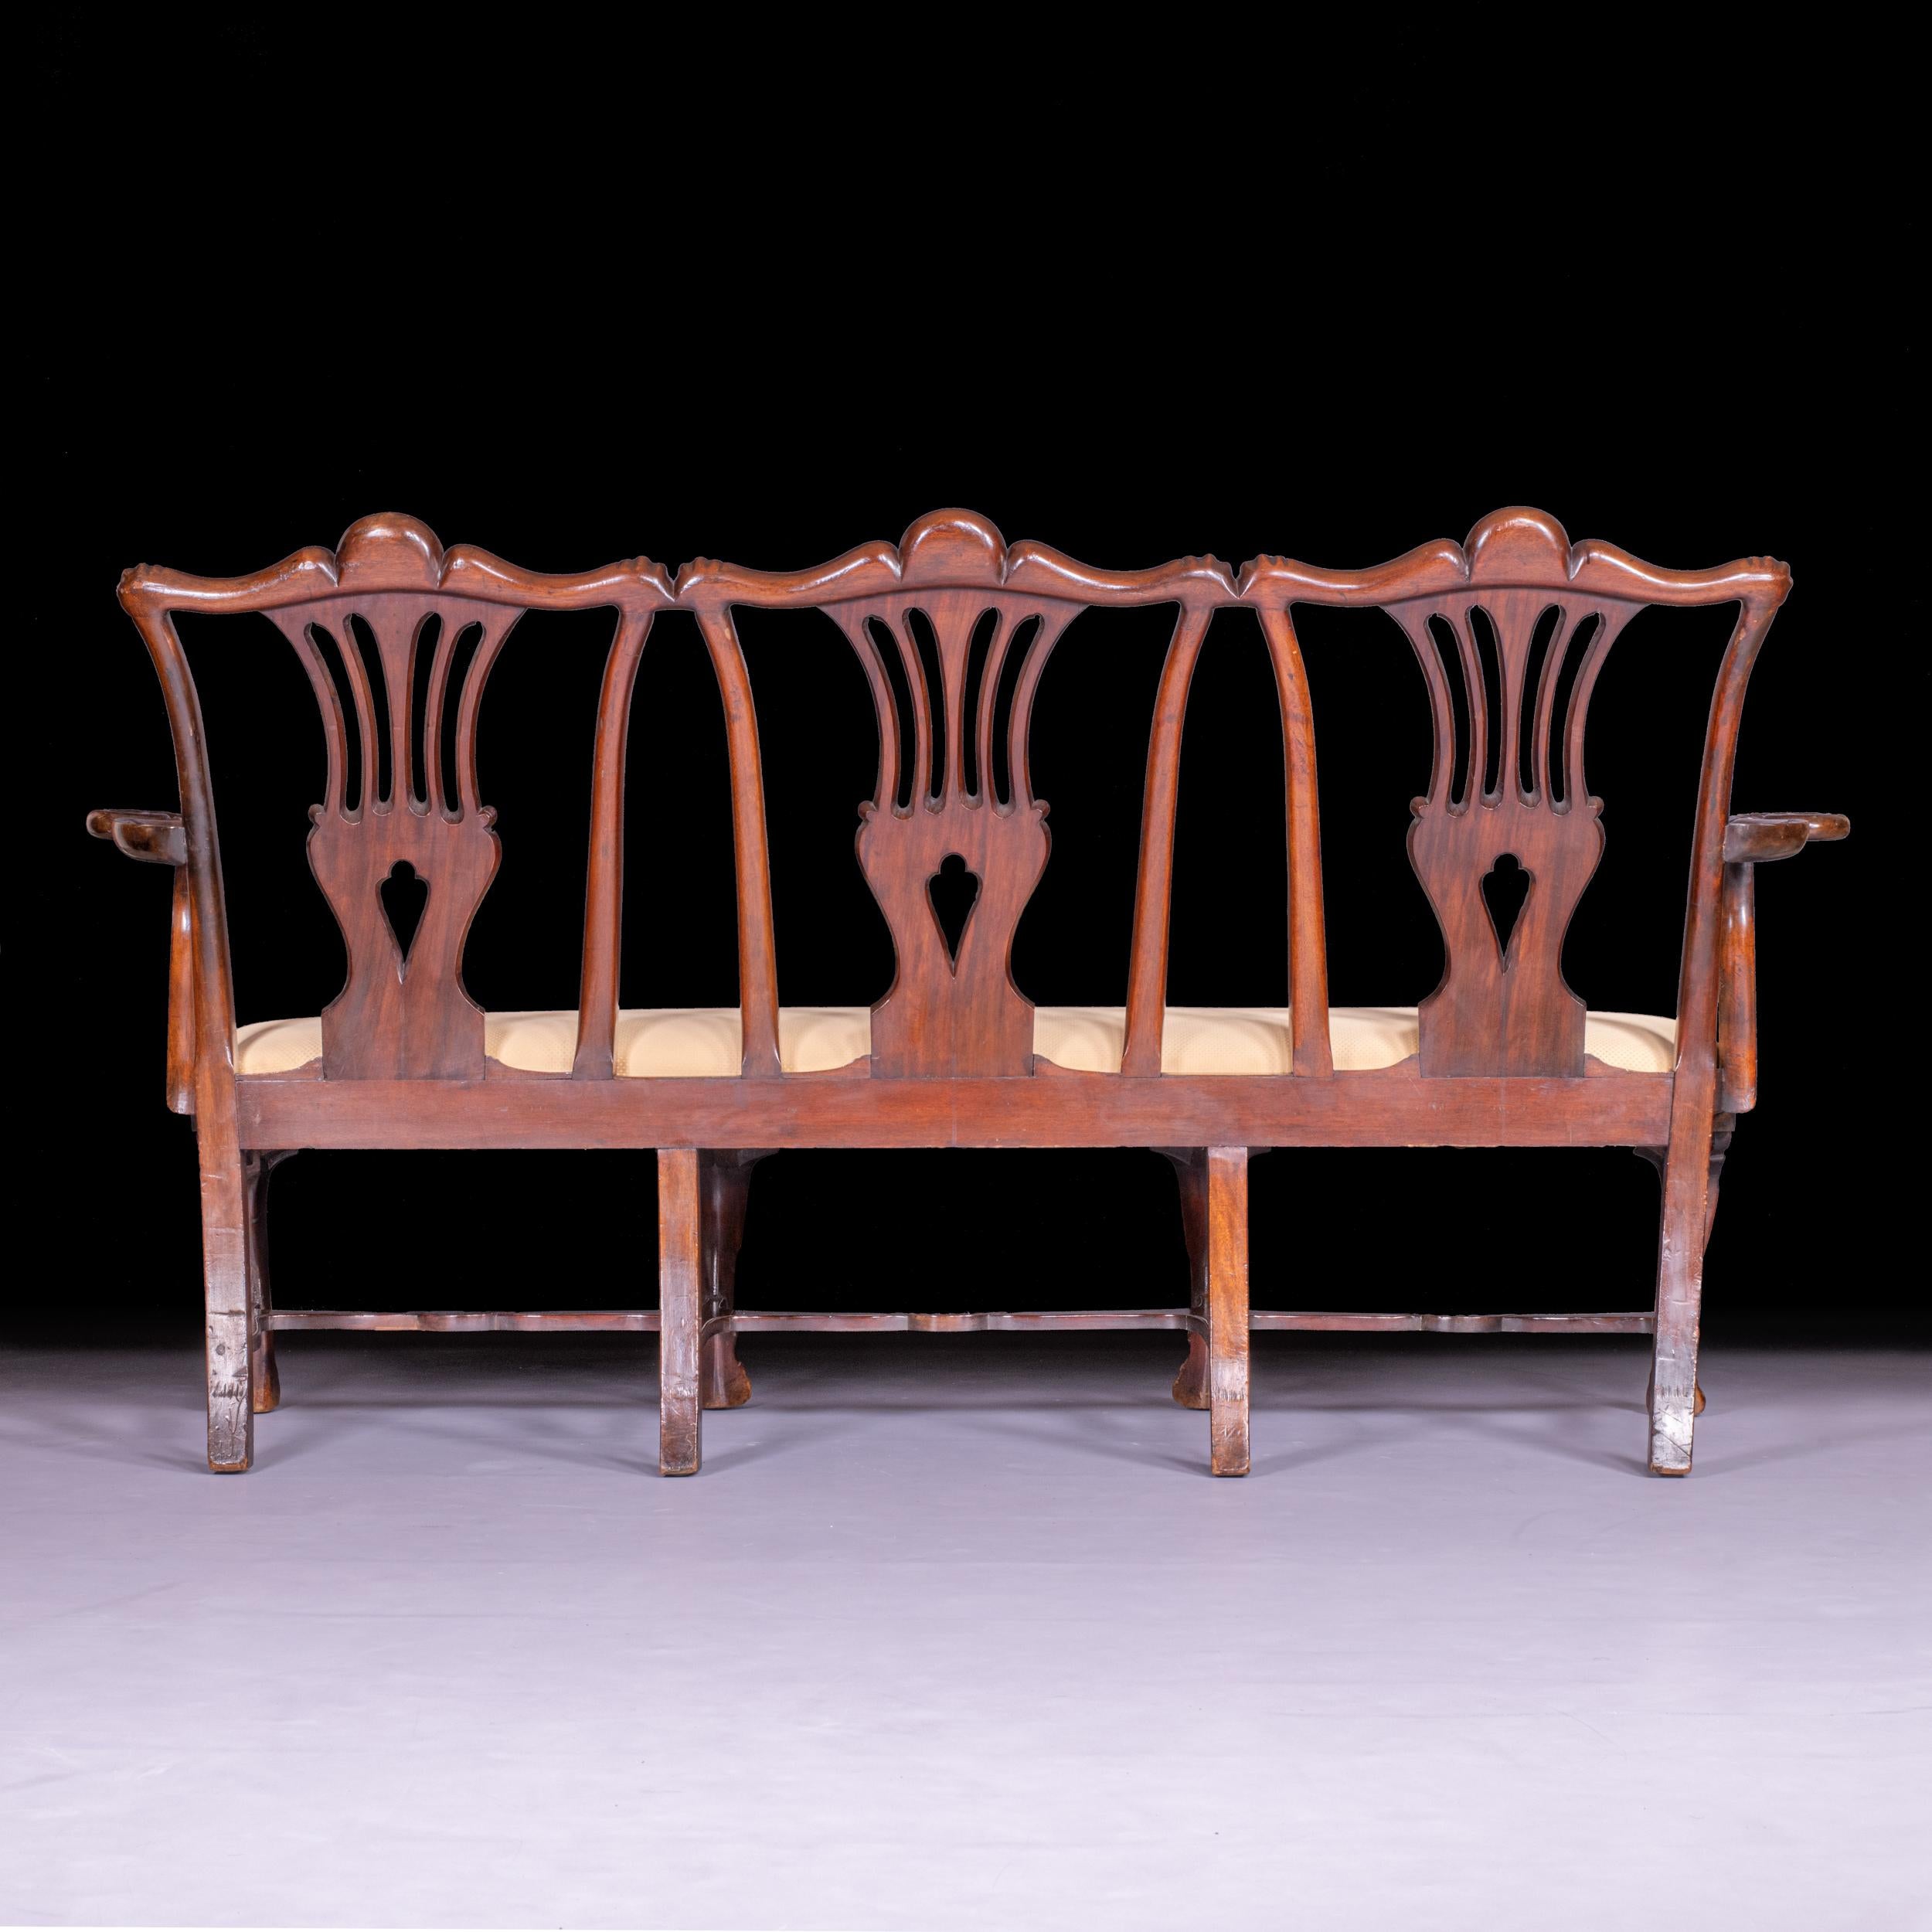 19th Century Irish George III Style Triple Chair Back Settee by Butler of Dublin For Sale 3